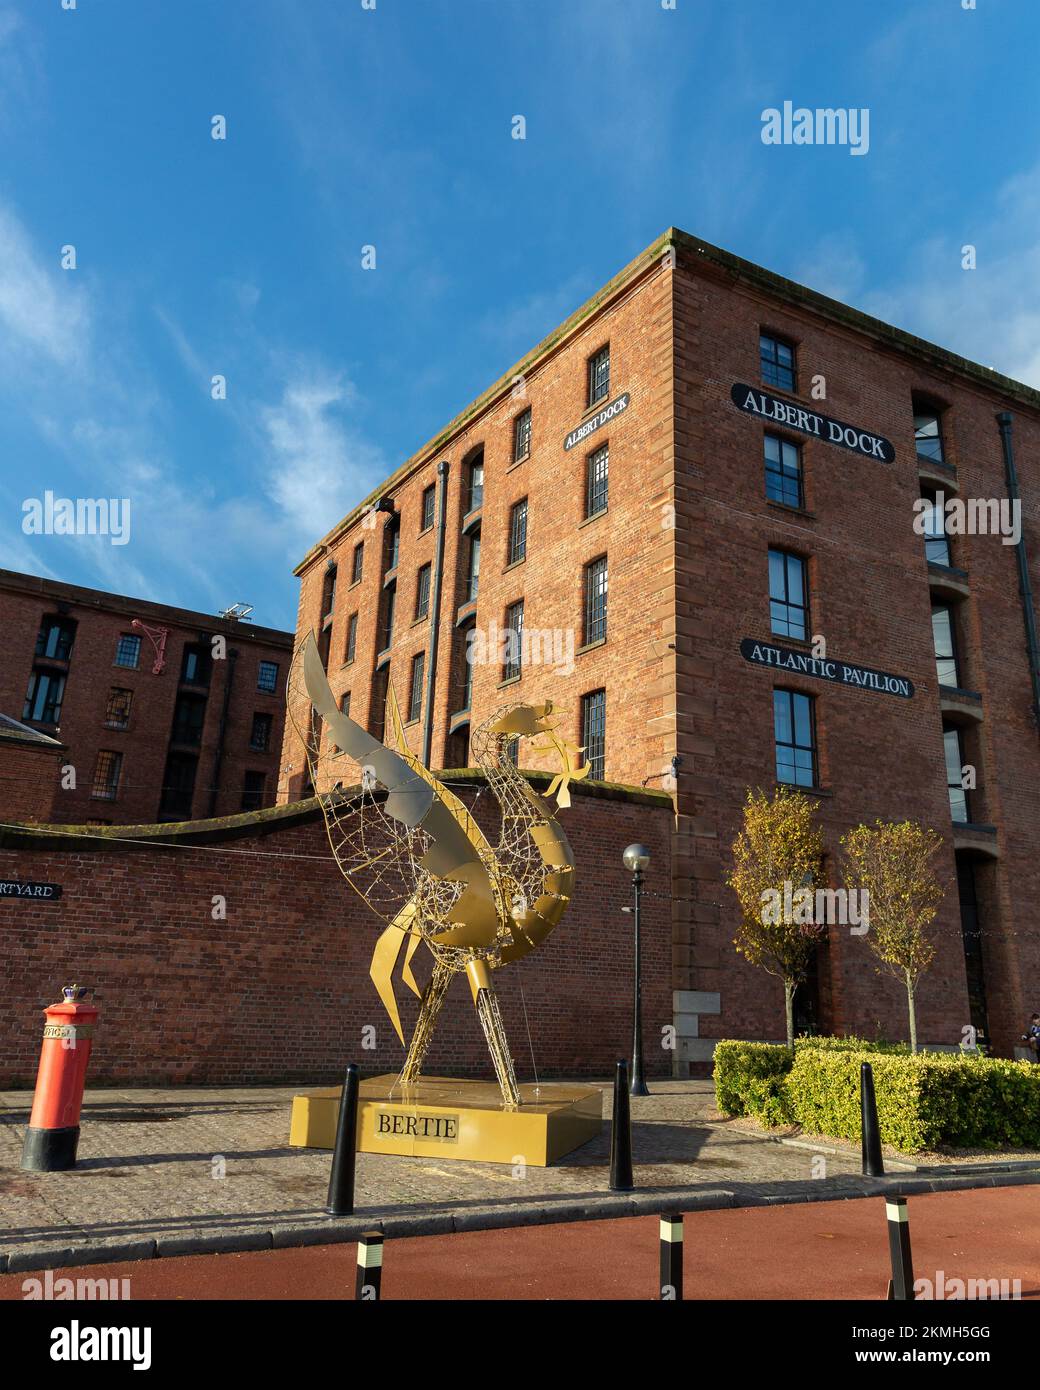 Liverpool, UK: Bertie the Liver Bird sculpture, part of the Christmas decorations, at the entrance to Royal Albert Dock Stock Photo